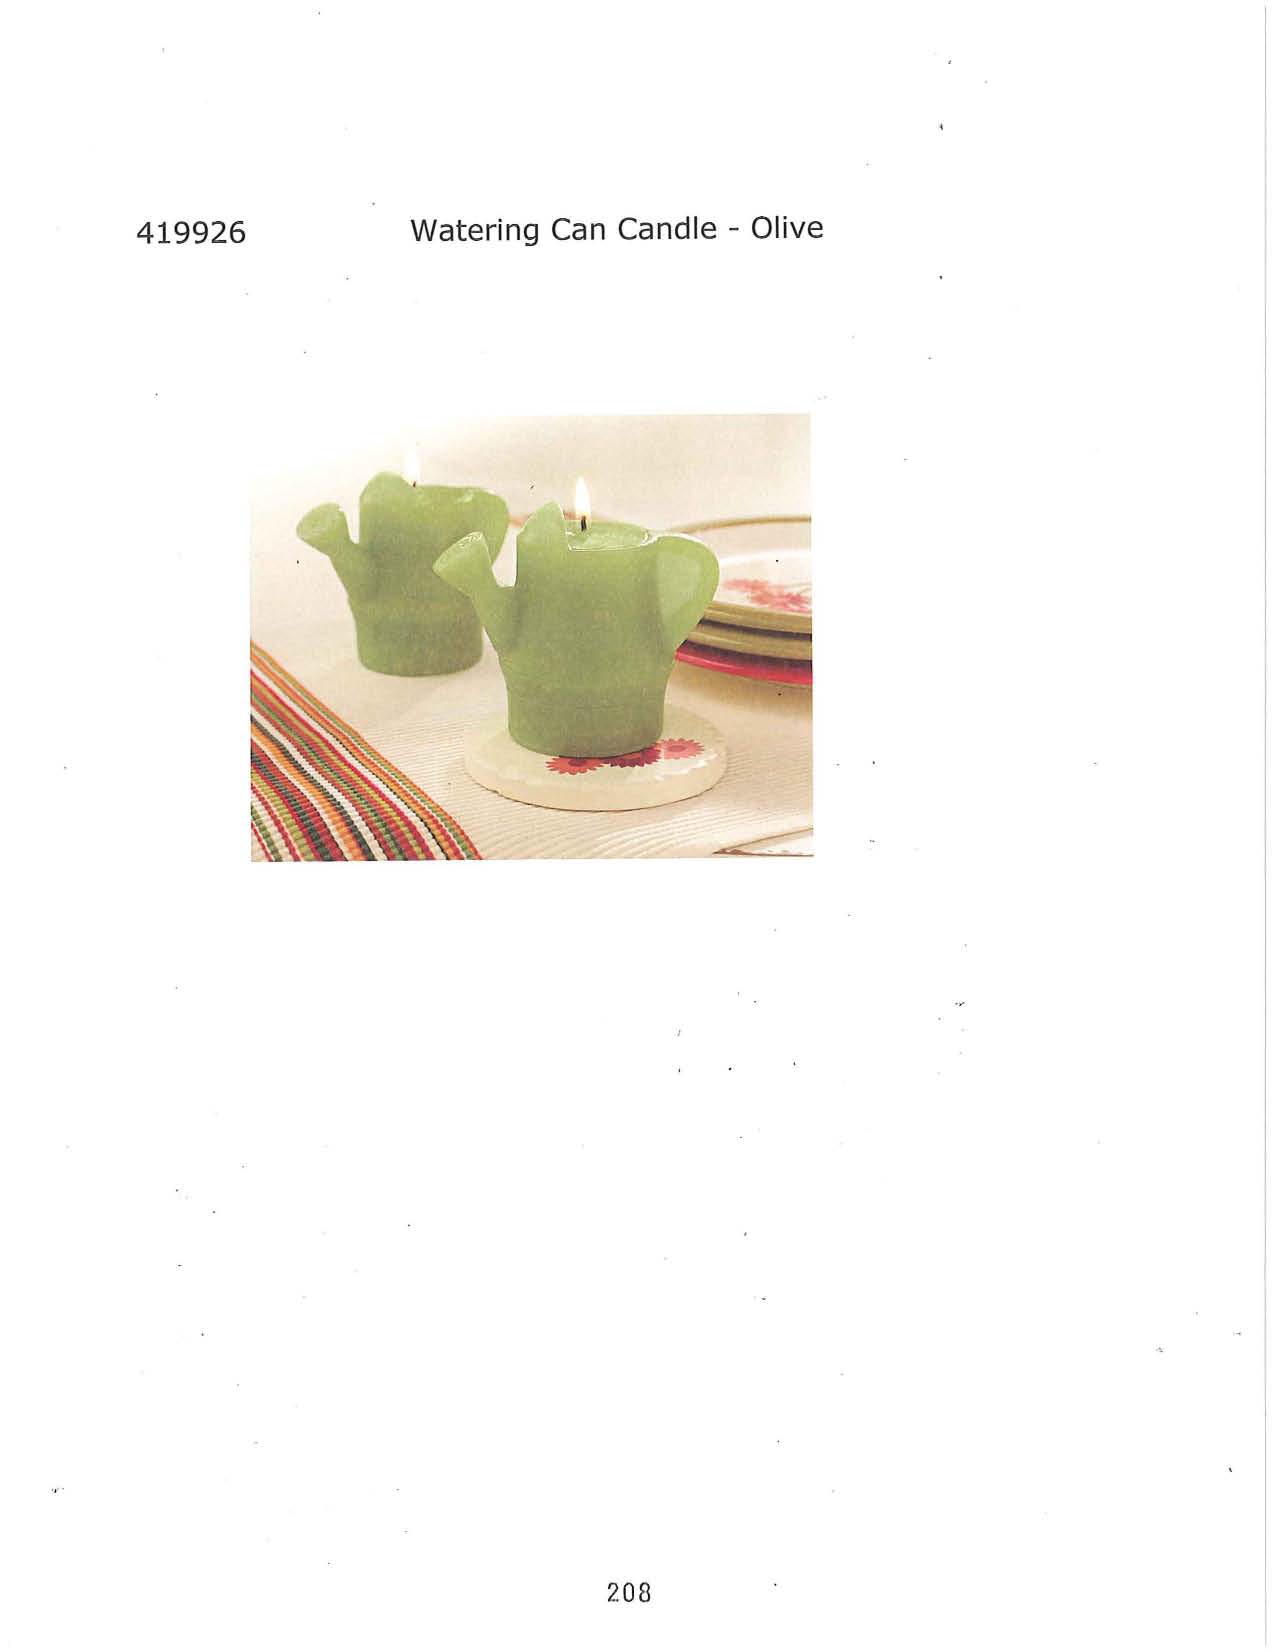 Watering Can Candle - Olive